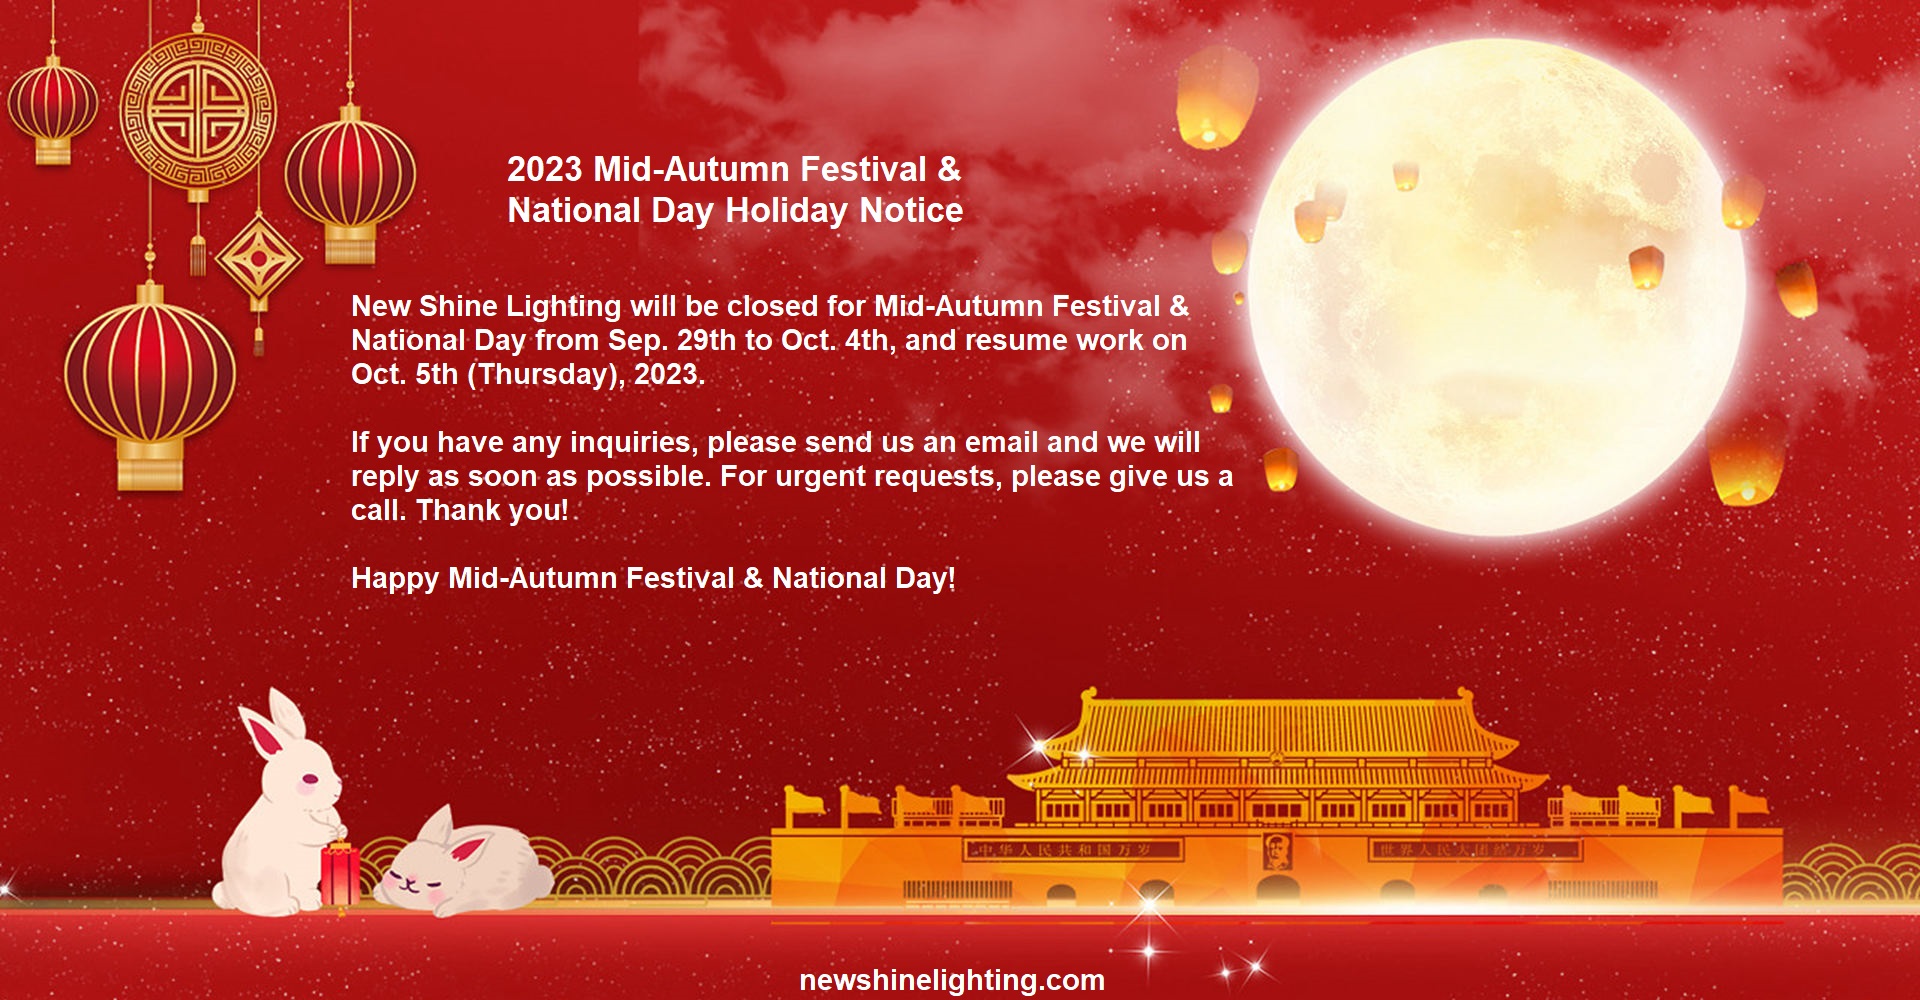 2023 Mid-Autumn Festival & National Day Holiday Notice